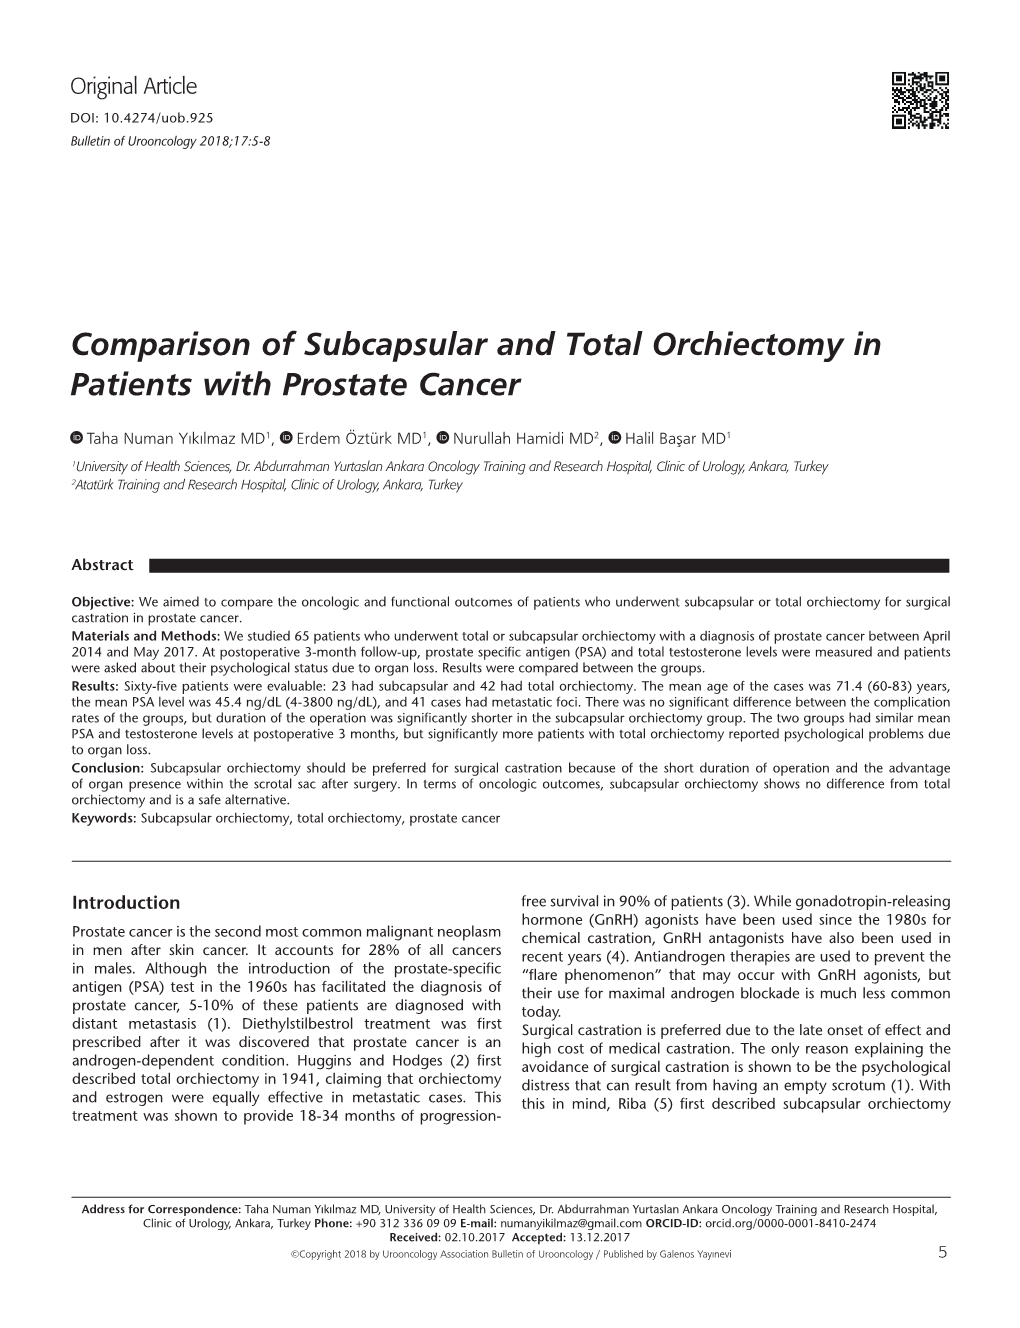 Comparison of Subcapsular and Total Orchiectomy in Patients with Prostate Cancer